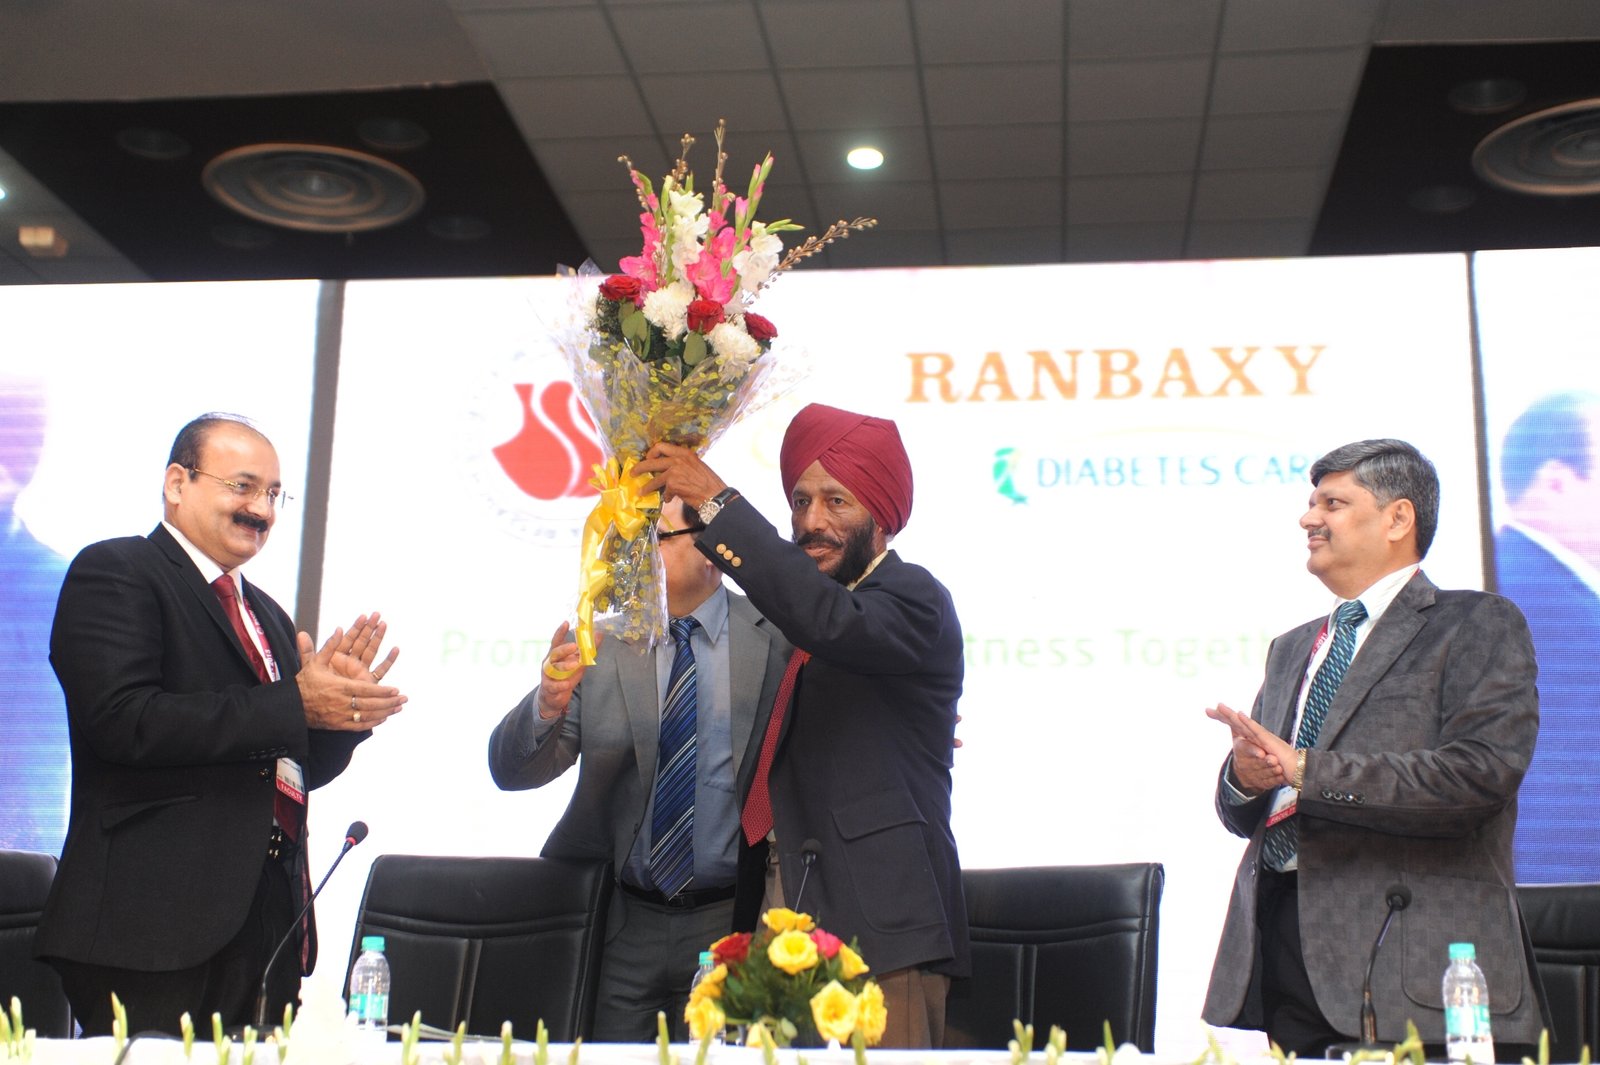 Flying Sikh, Milkha Singh lends his helping hand to Ranbaxy's awareness campaign on diabetes!